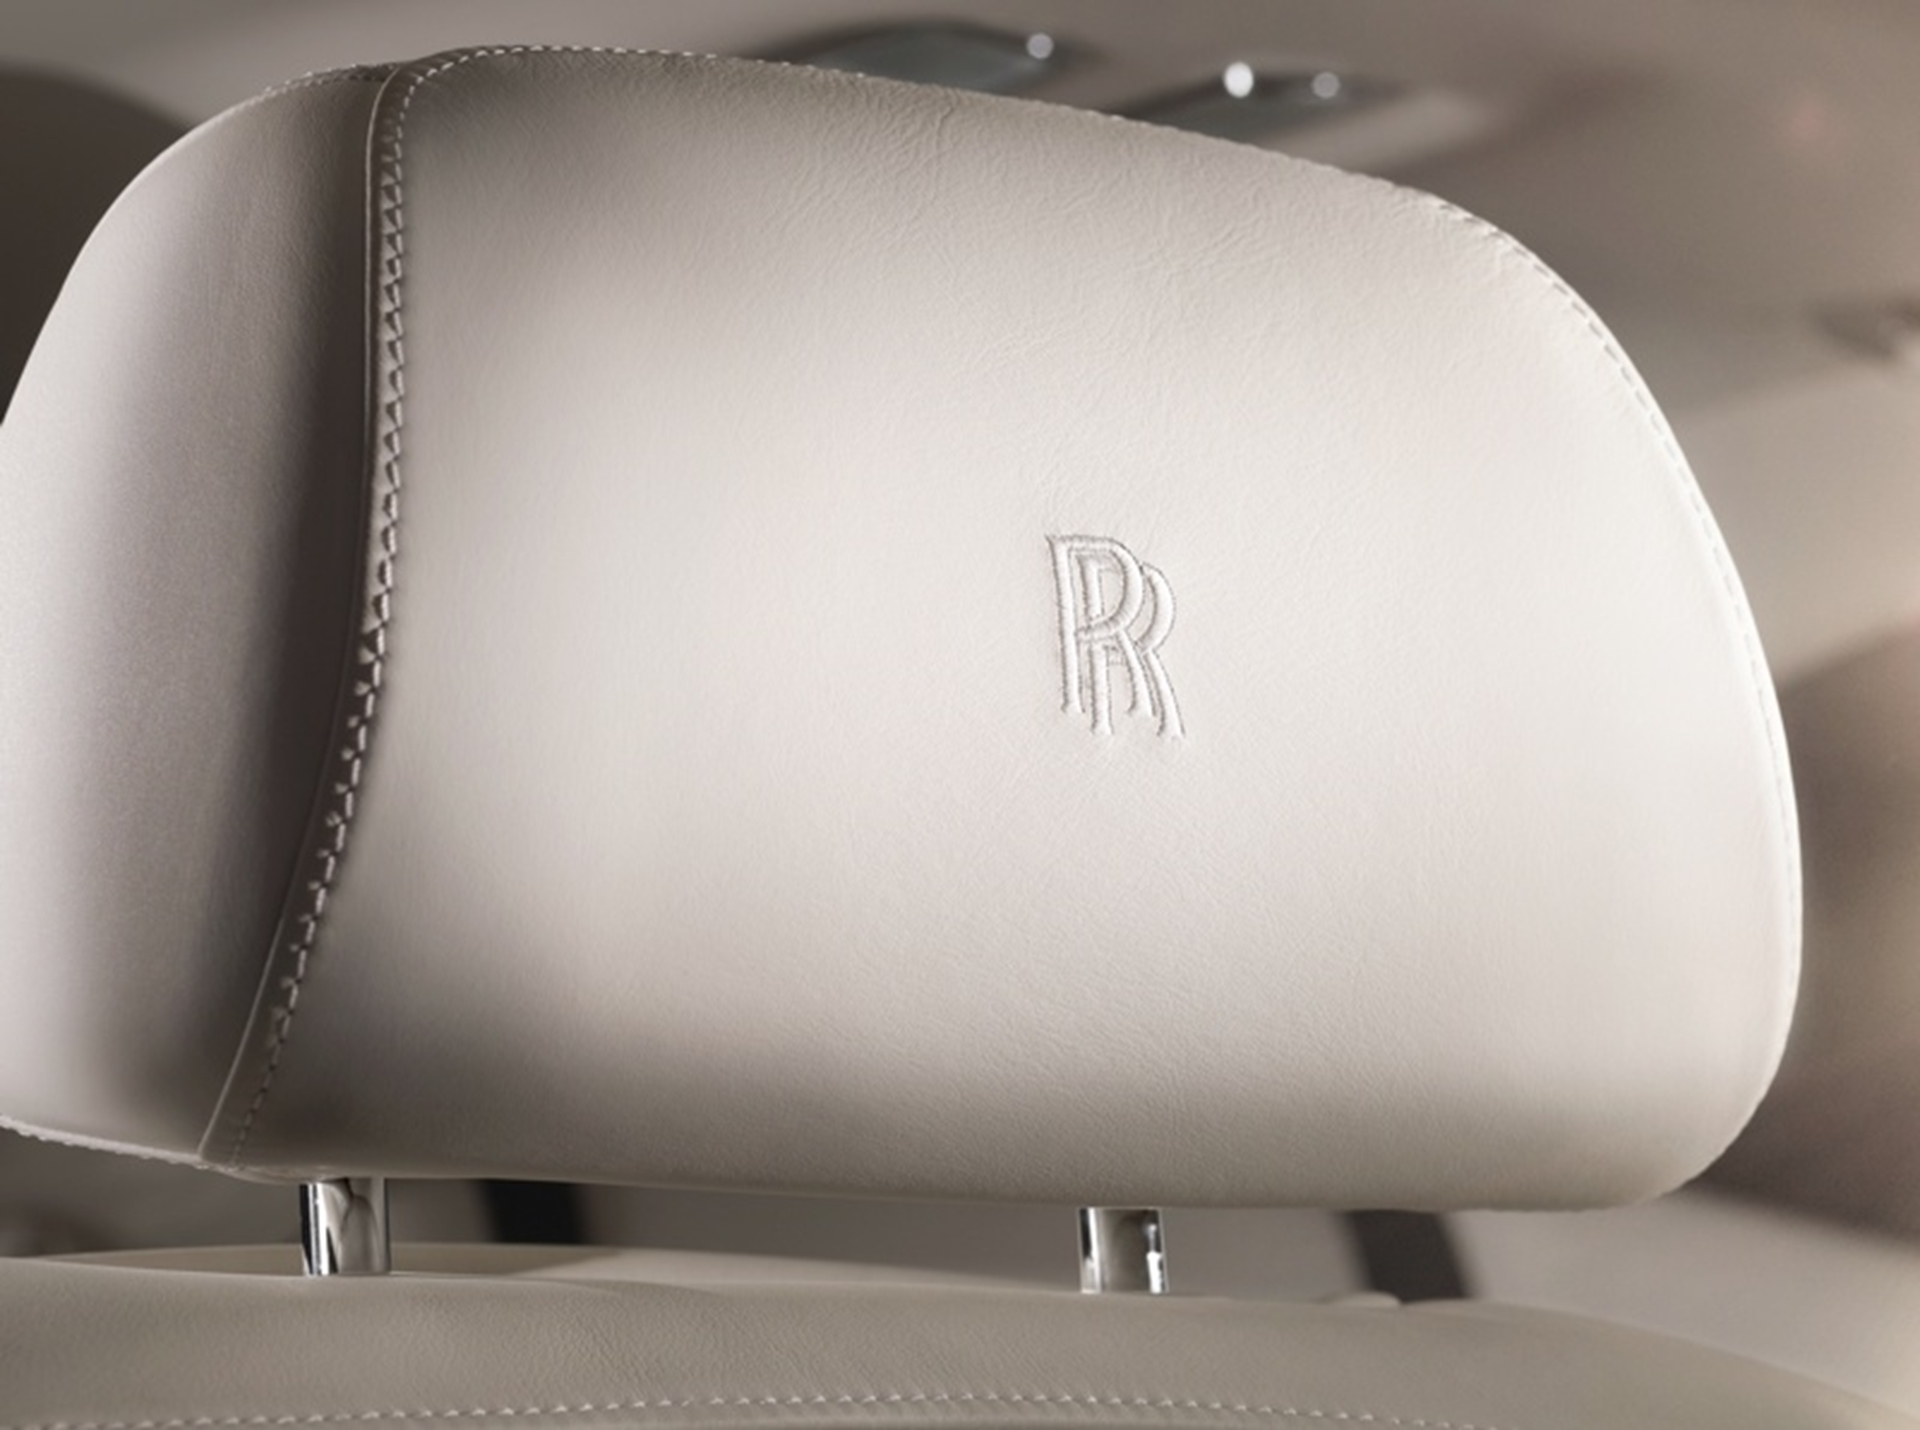 ROLLS ROYCE GHOST SIX SENSES CONCEPT ELEVATES THE SPIRIT OF ECSTASY TO A NEW LEVEL OF SENSORY INDULGENCE